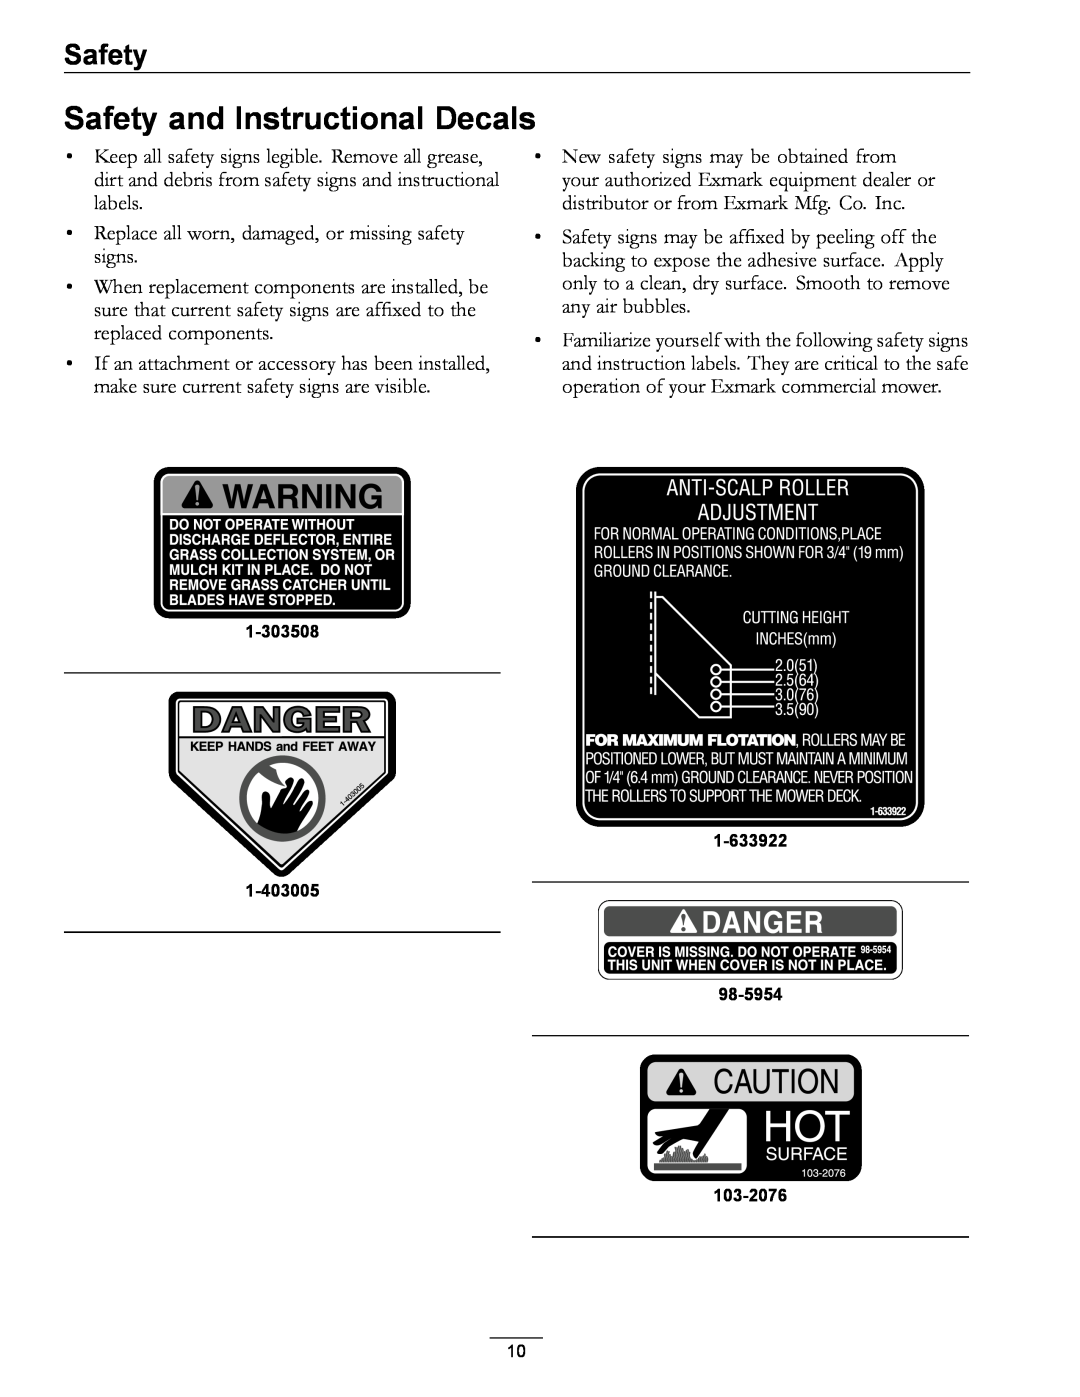 Exmark 4500-471, 000 & higher, S/N 790 manual Safety and Instructional Decals 